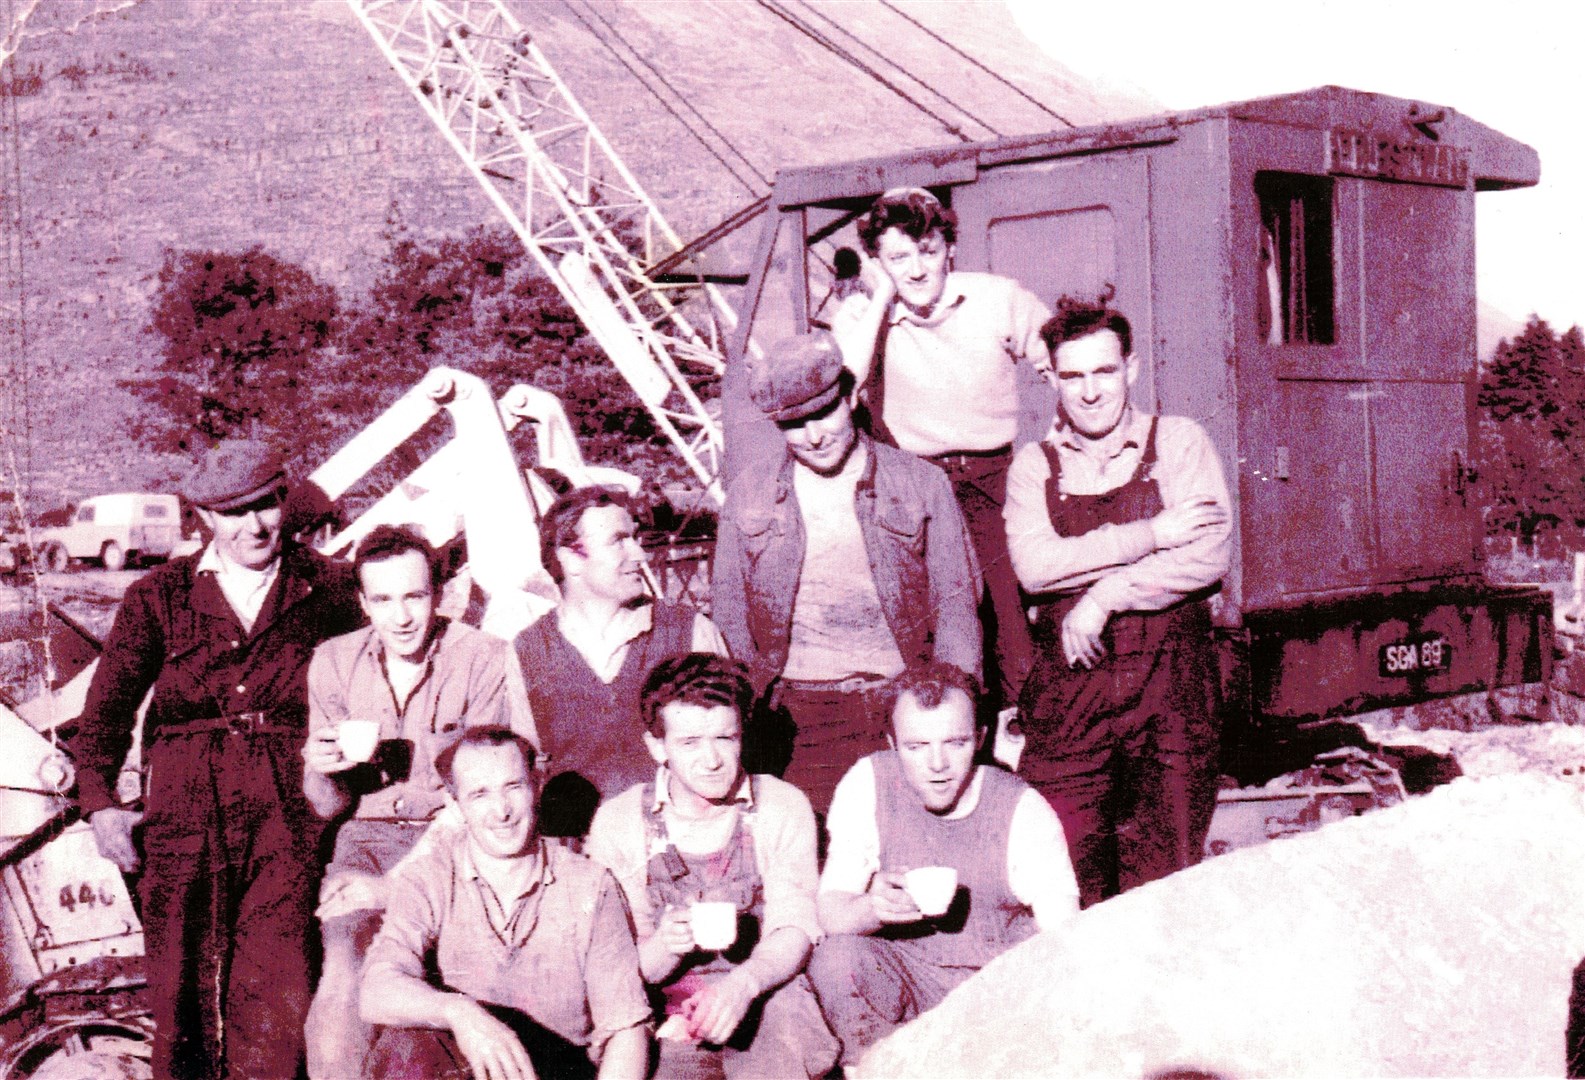 The Limmer Trinidad squad working on the Balgy Gap early in the 1960s. Until the Balgy Gap was breached in 1963, there was a lengthy diversion to get from Shieldaig to Torridon. Mrs J. MacDonald of Dingwall shared this photograph for which she has most of the names: Ian MacLennan, Dan Crombie, Cameron Shepherd, Bert Shepherd and Robin and Willie Newton (twins). Another worker was nicknamed Cash and another she has down as Tommy.